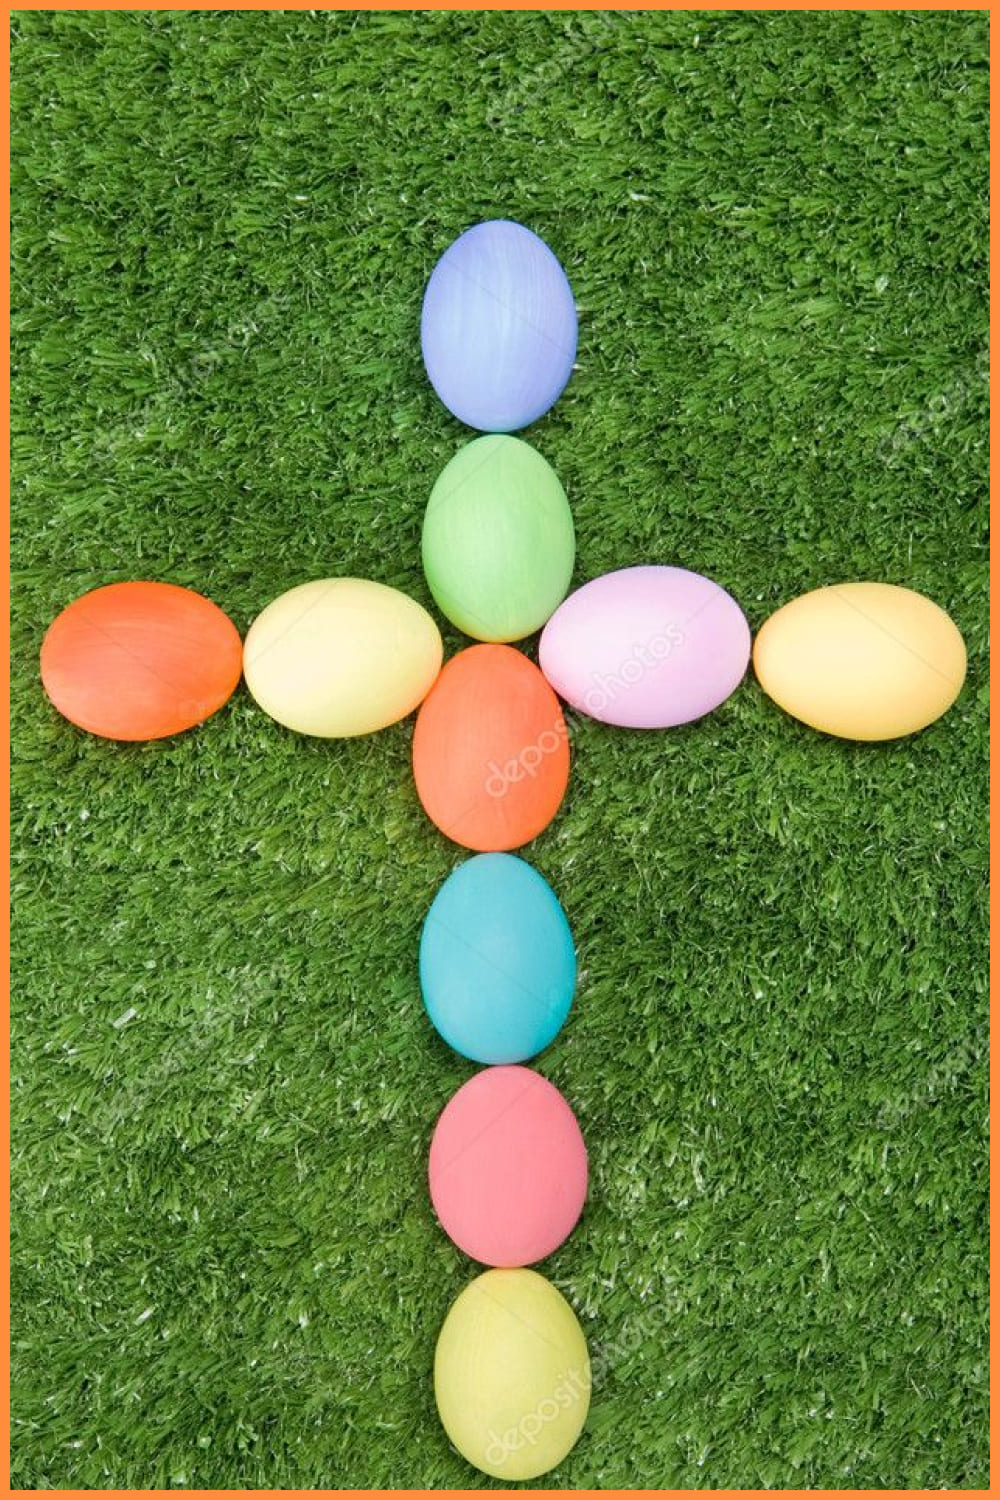 Cross made of colorful eggs on the grass.